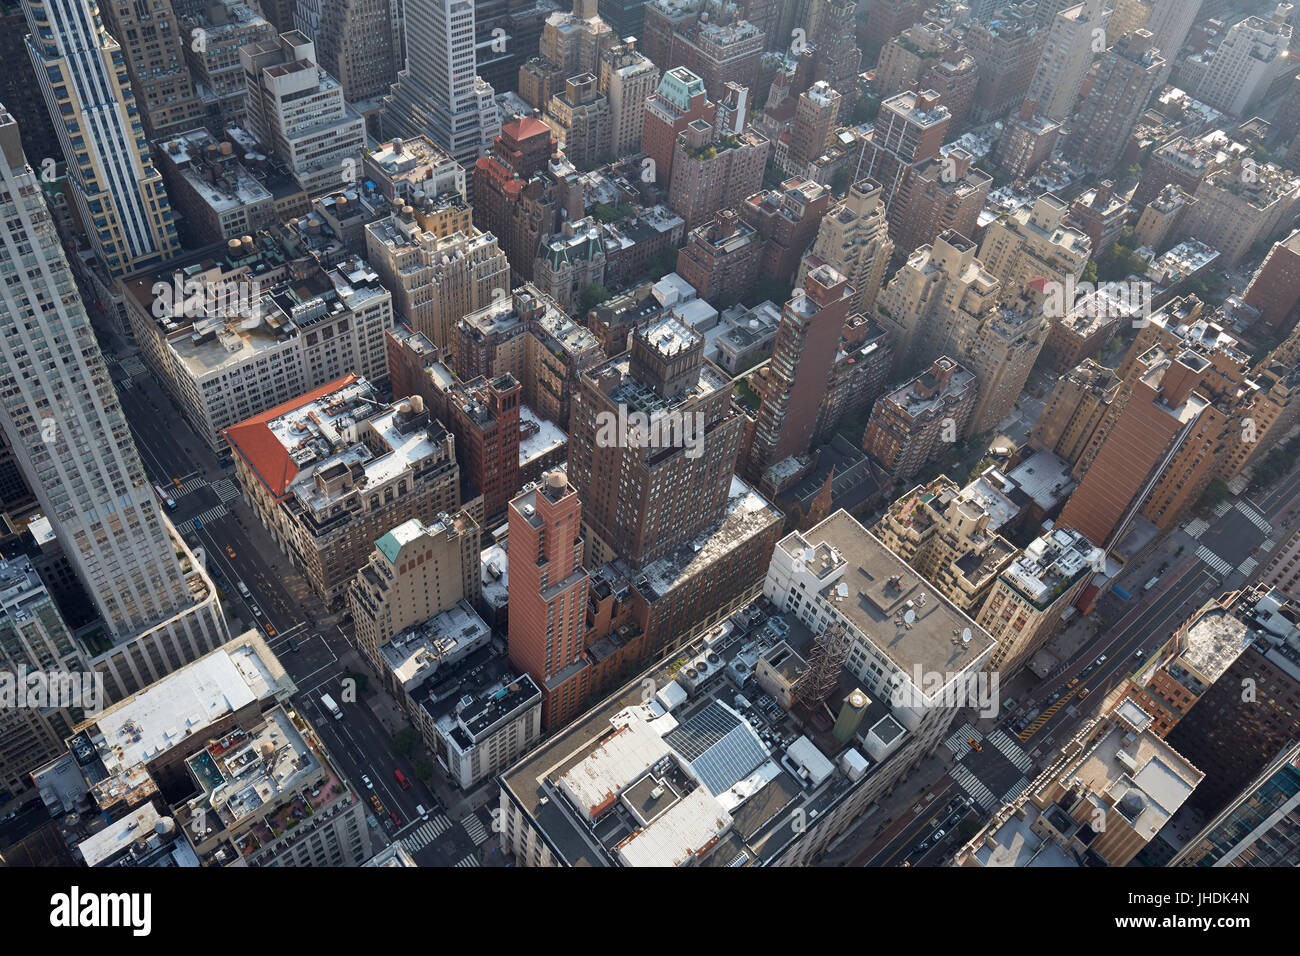 New York City Manhattan aerial view with skyscrapers texture background Stock Photo